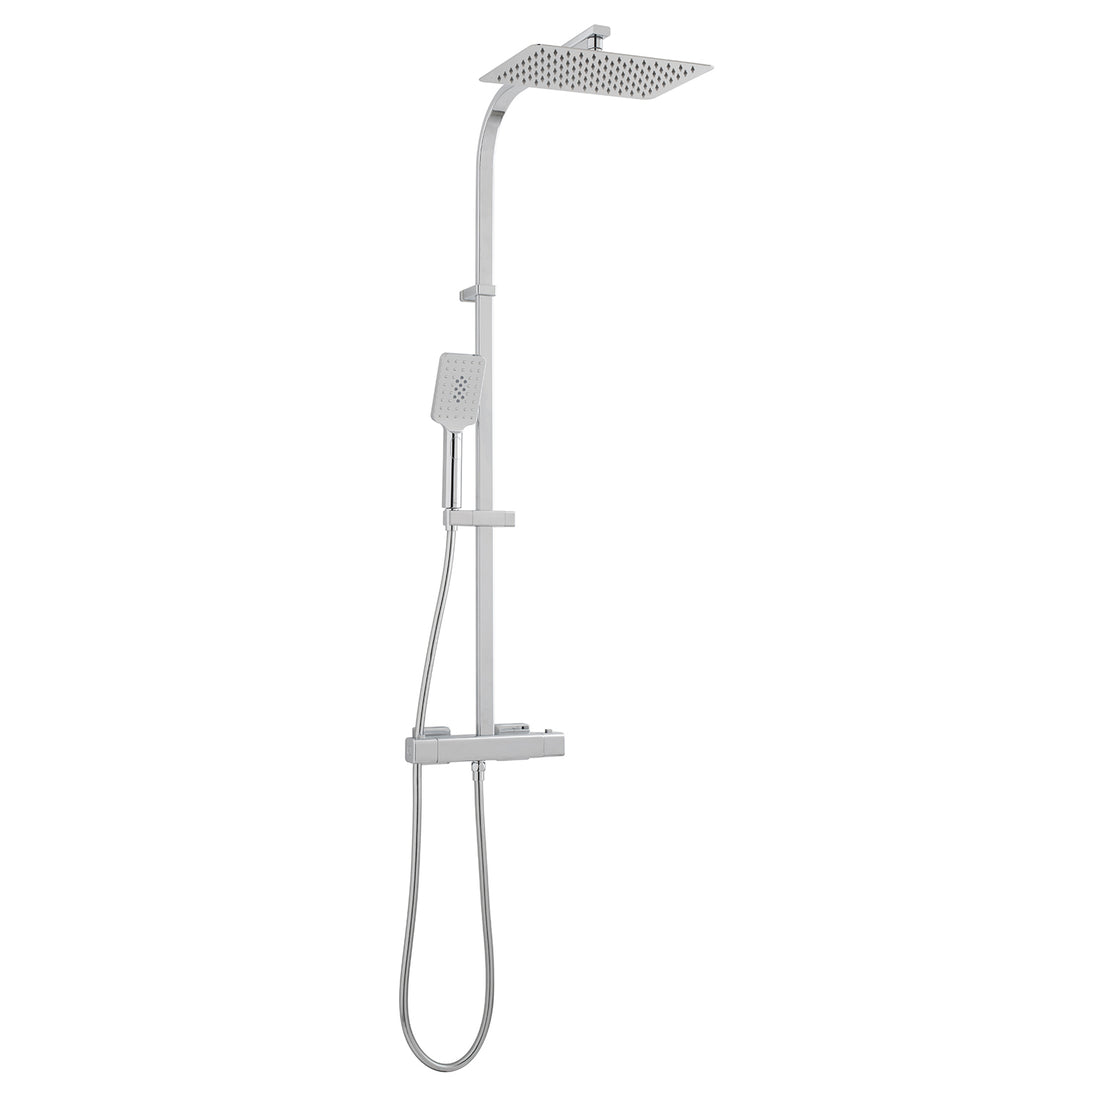 Vado Phase showering column with thermostatic shower valve